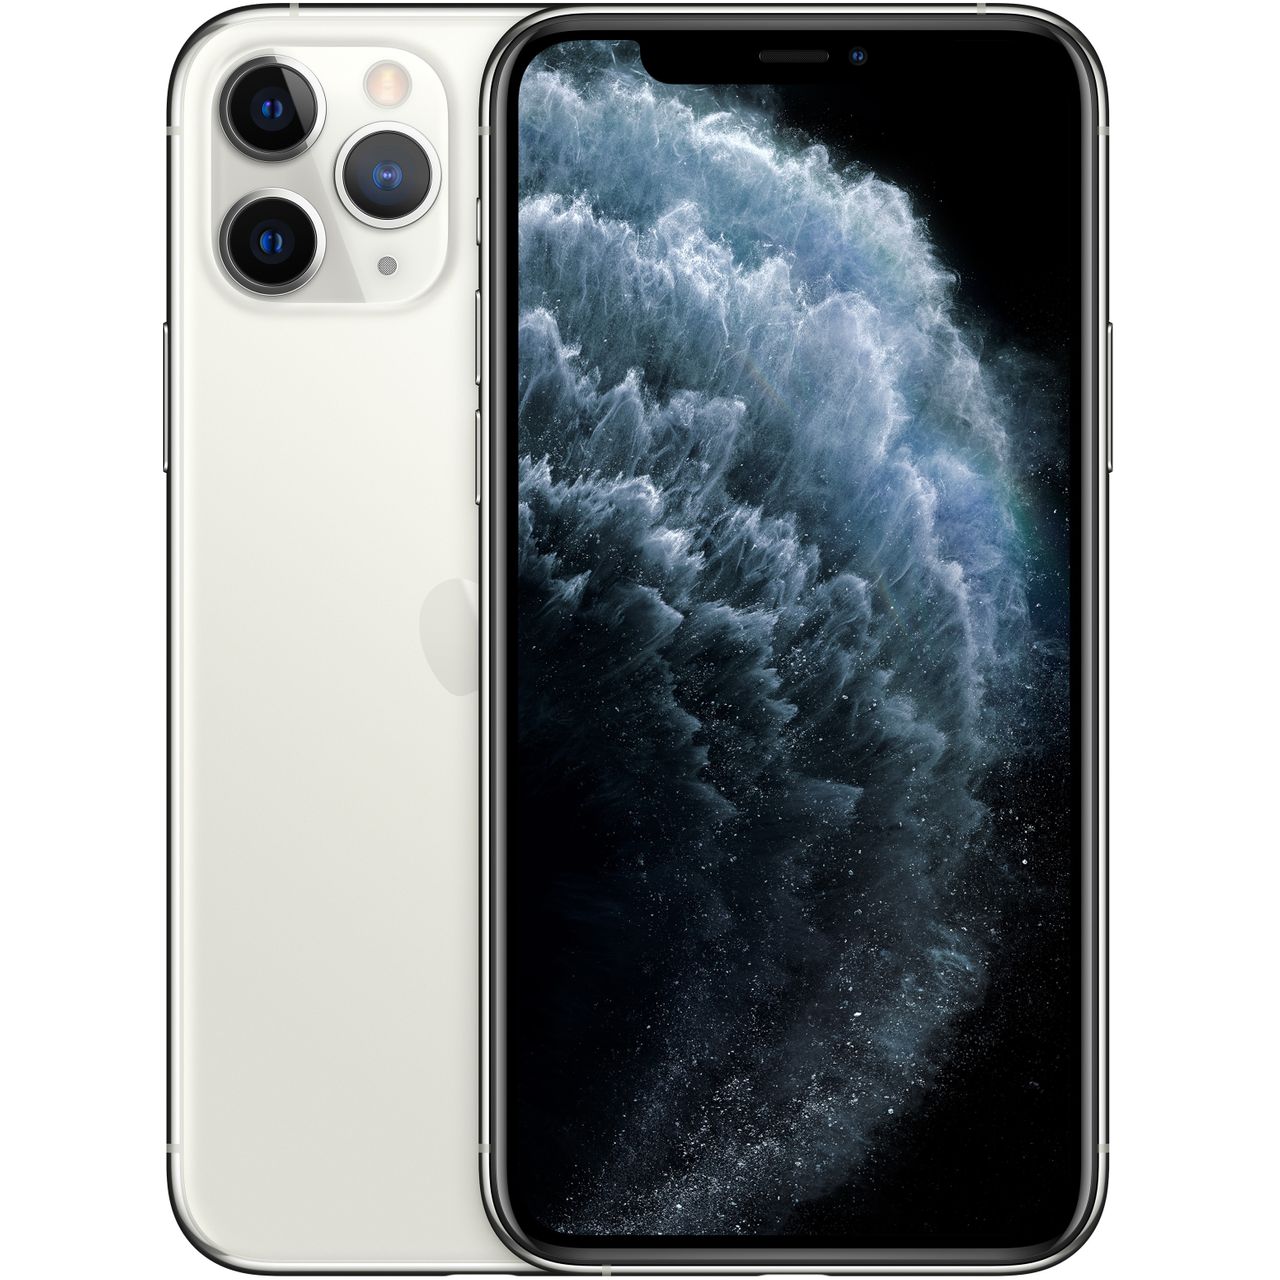 Apple iPhone 11 Pro 512GB in Silver Review